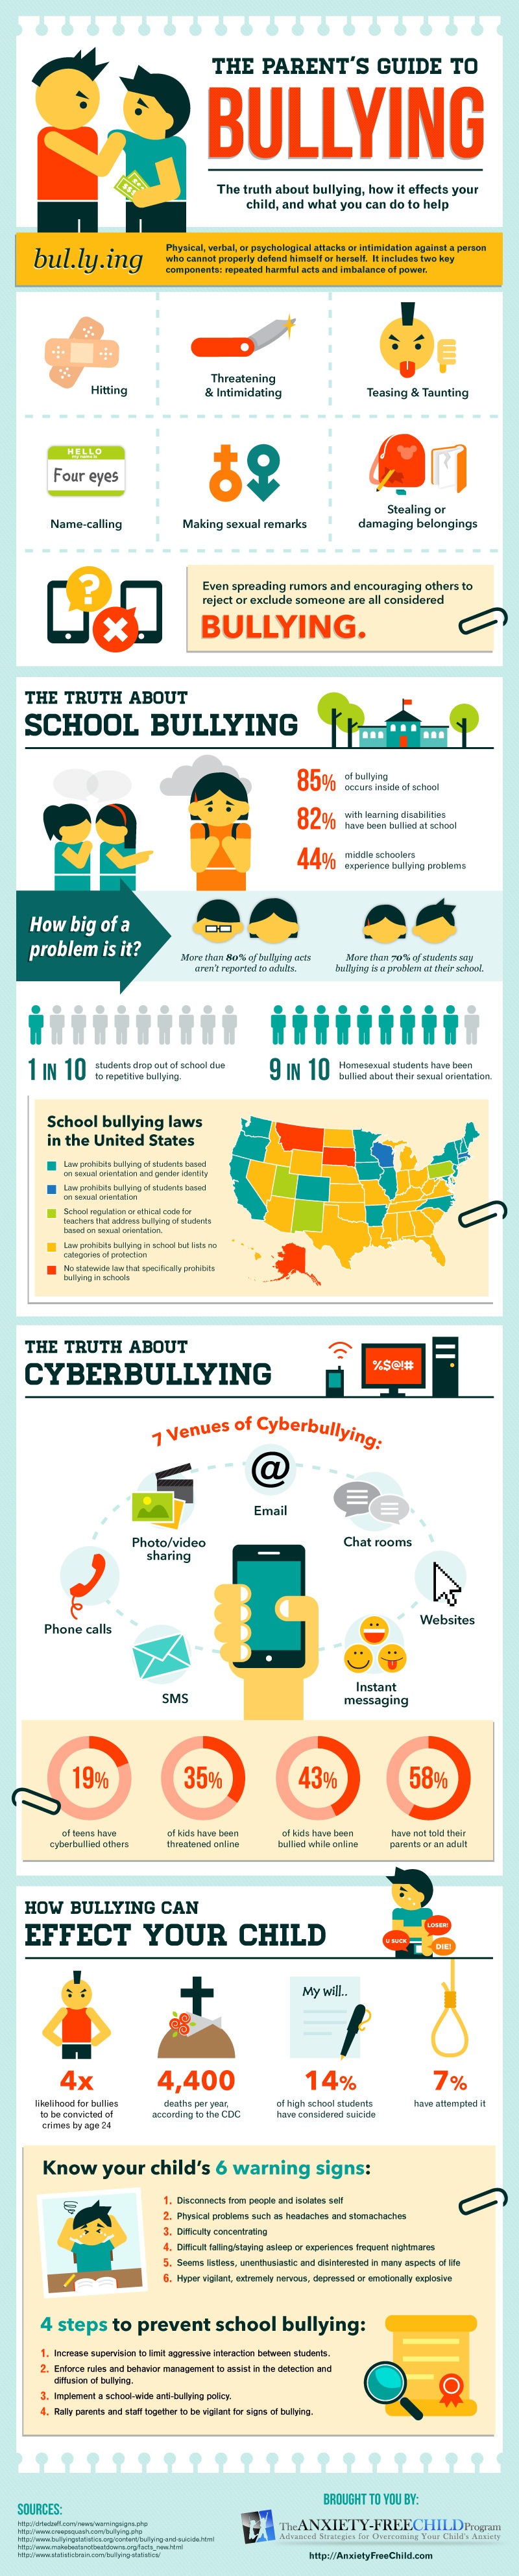 The Parents' Guide to Bullying Infographic